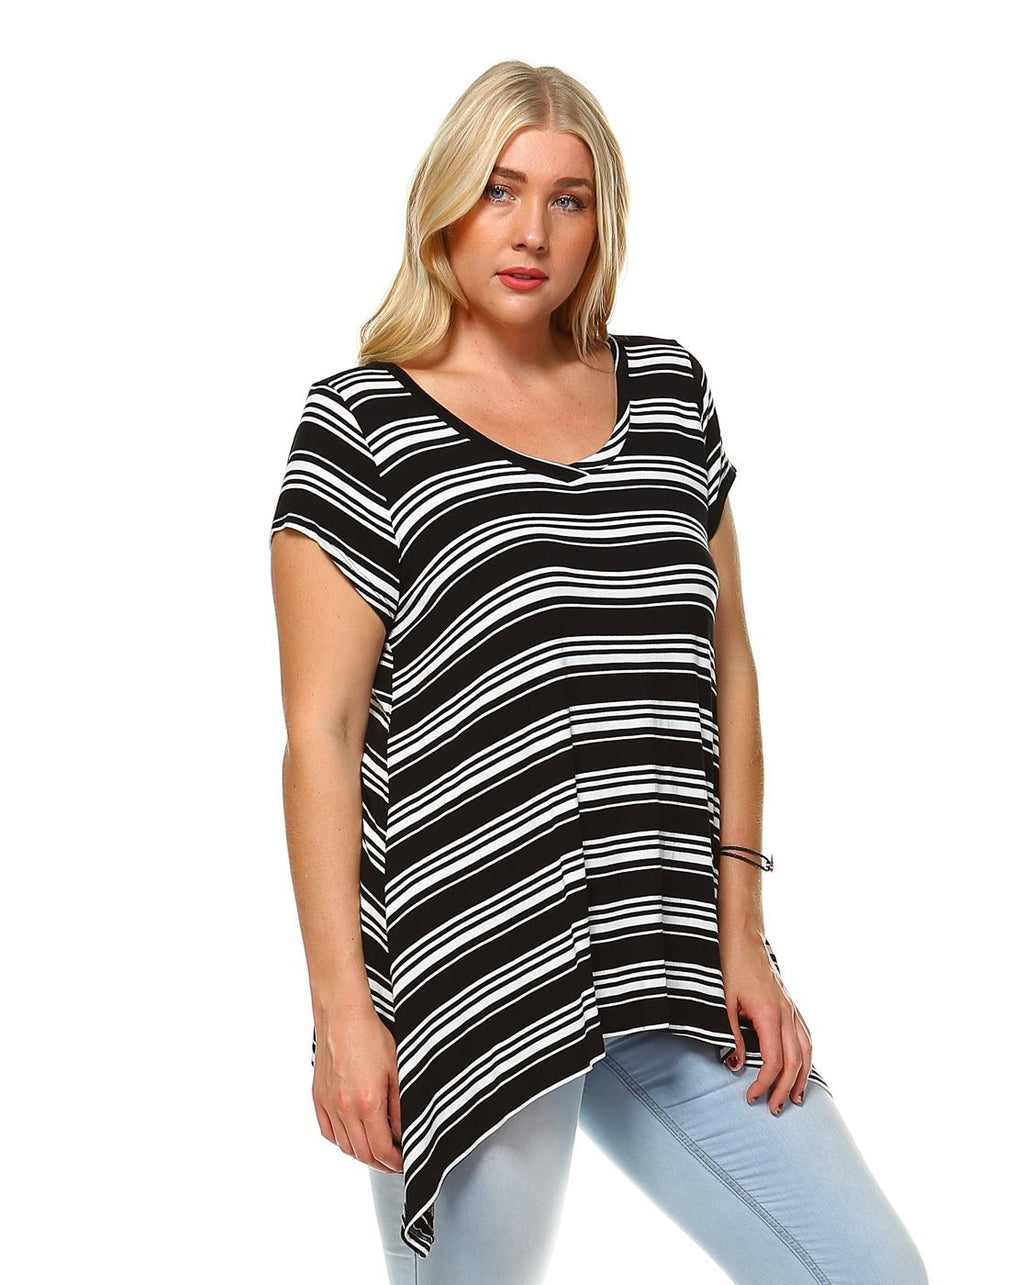 Black and White Striped V neck capped sleeve shark bite top Perfect skirt for an effortless boho style, pair with boots for fall or your favorite sandals for summer. Festivals, Beach Day, Vacation